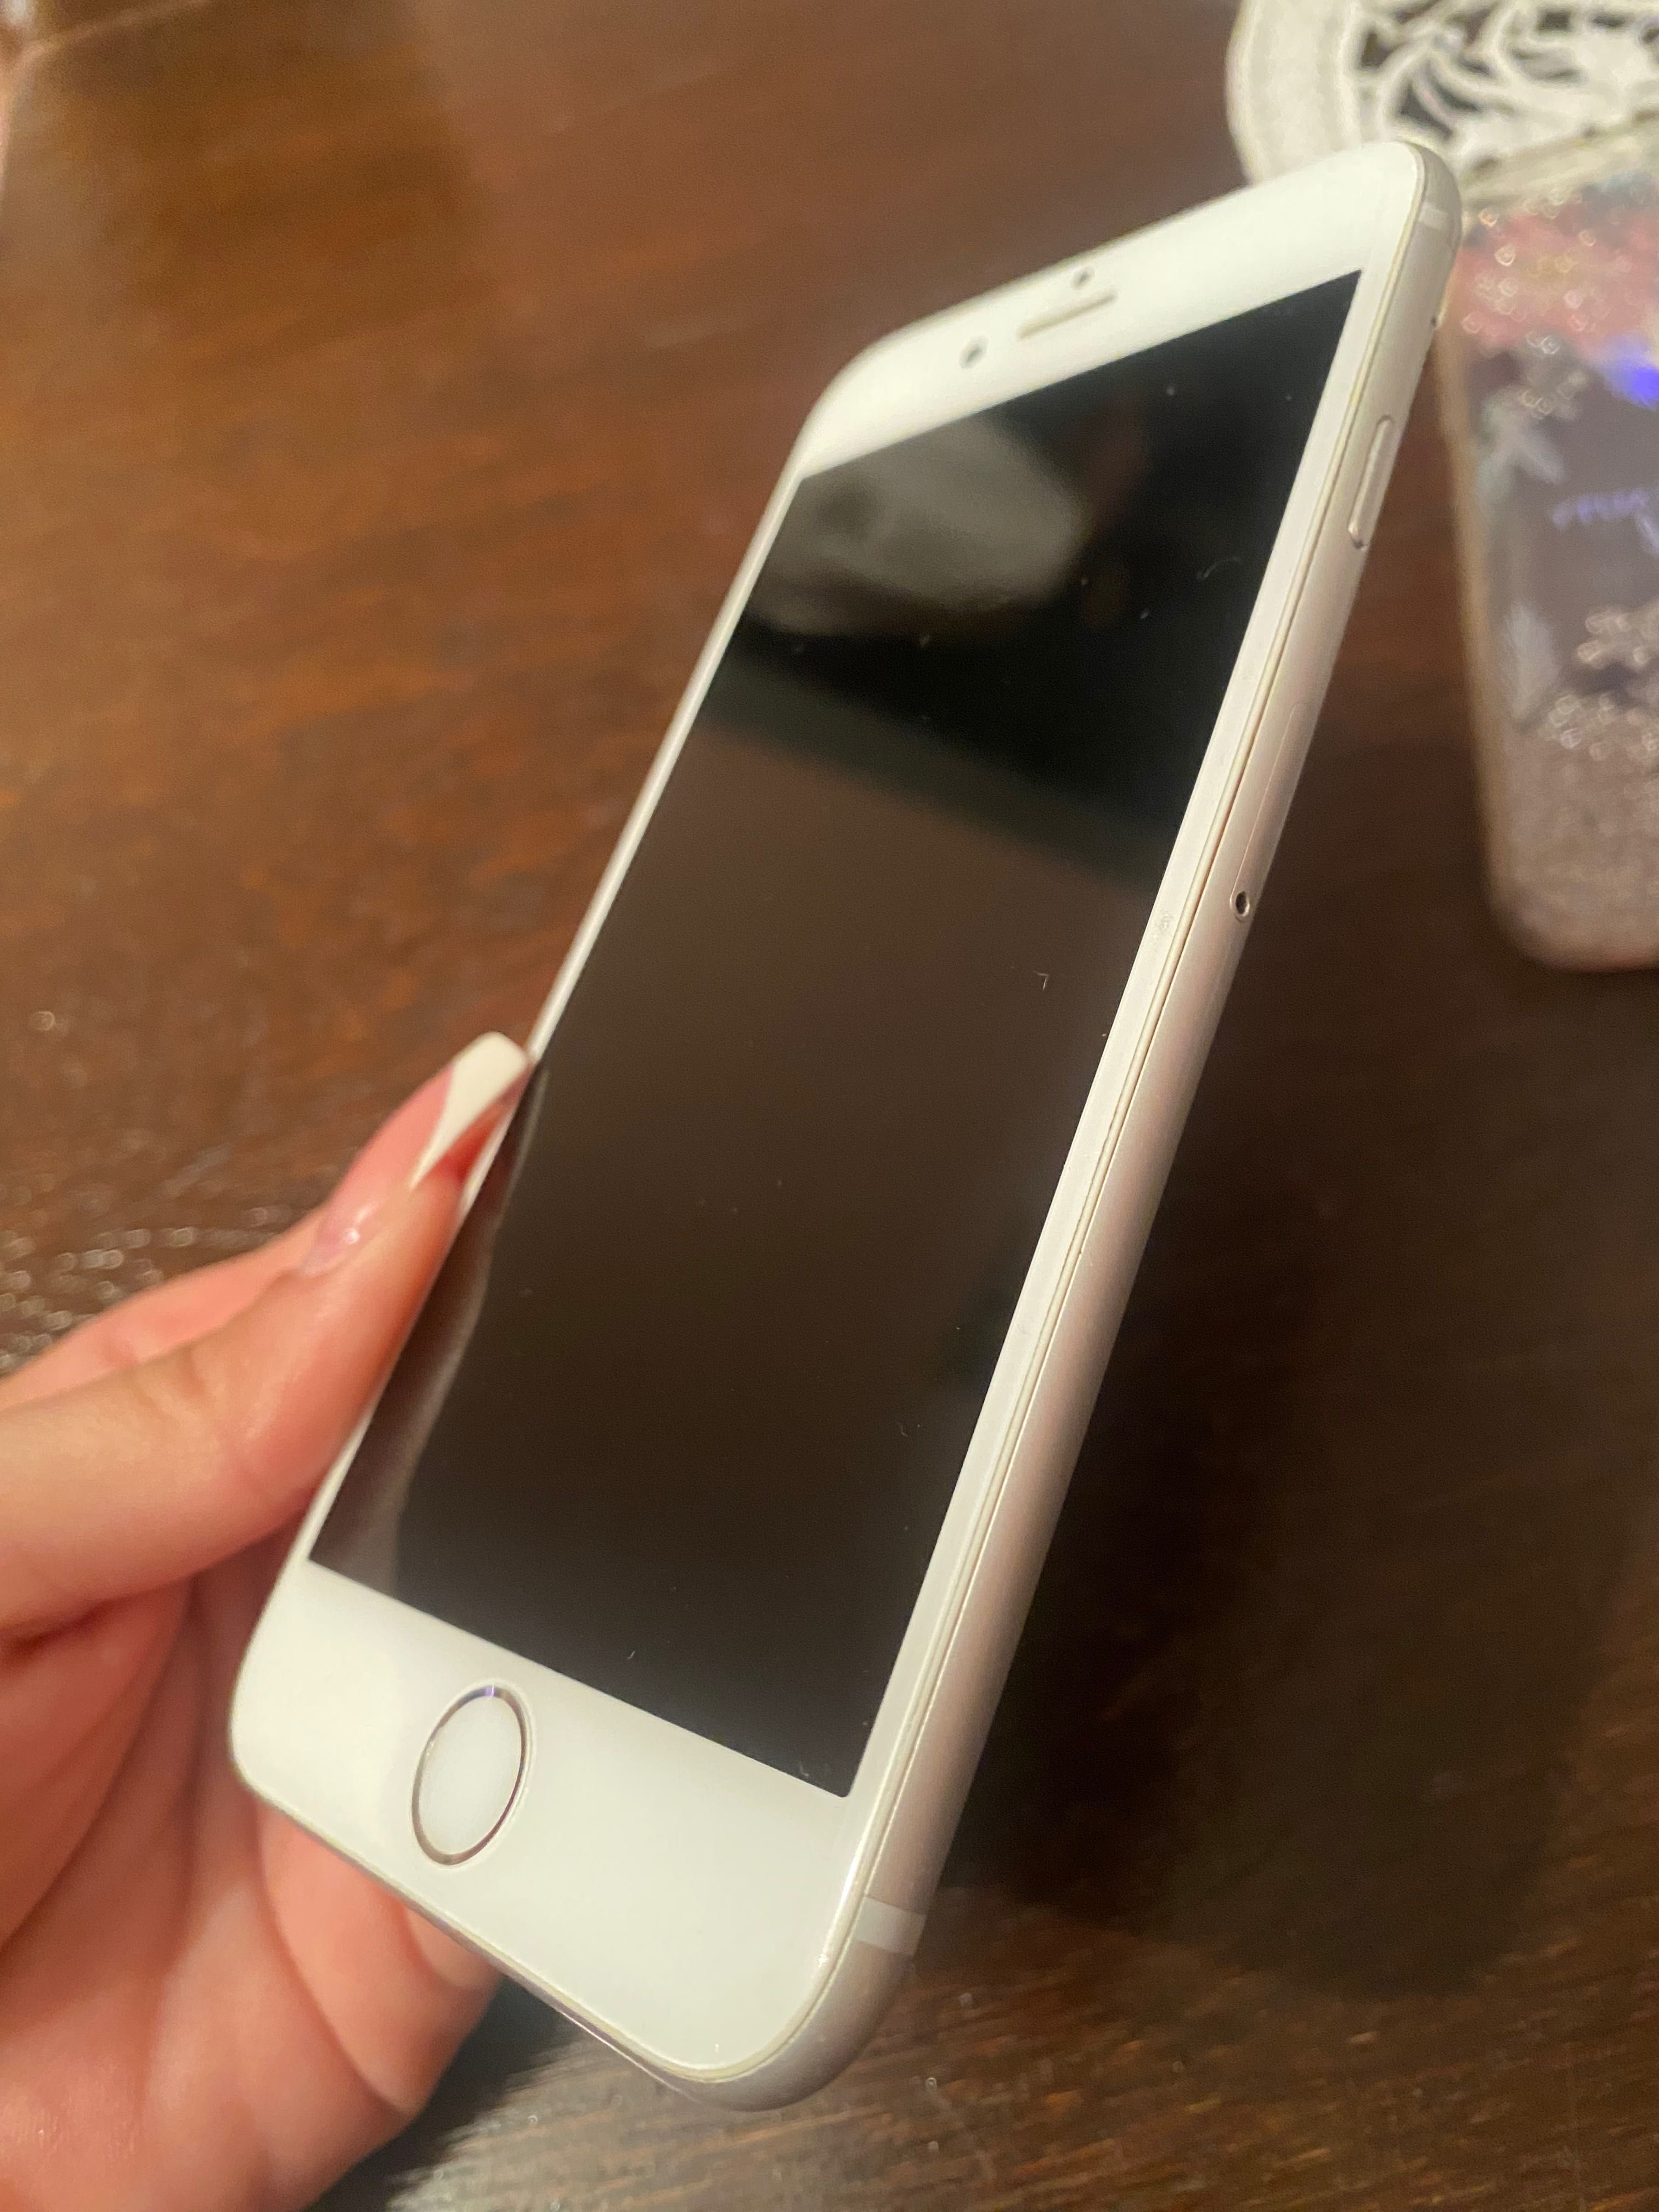 iphone 6s silver